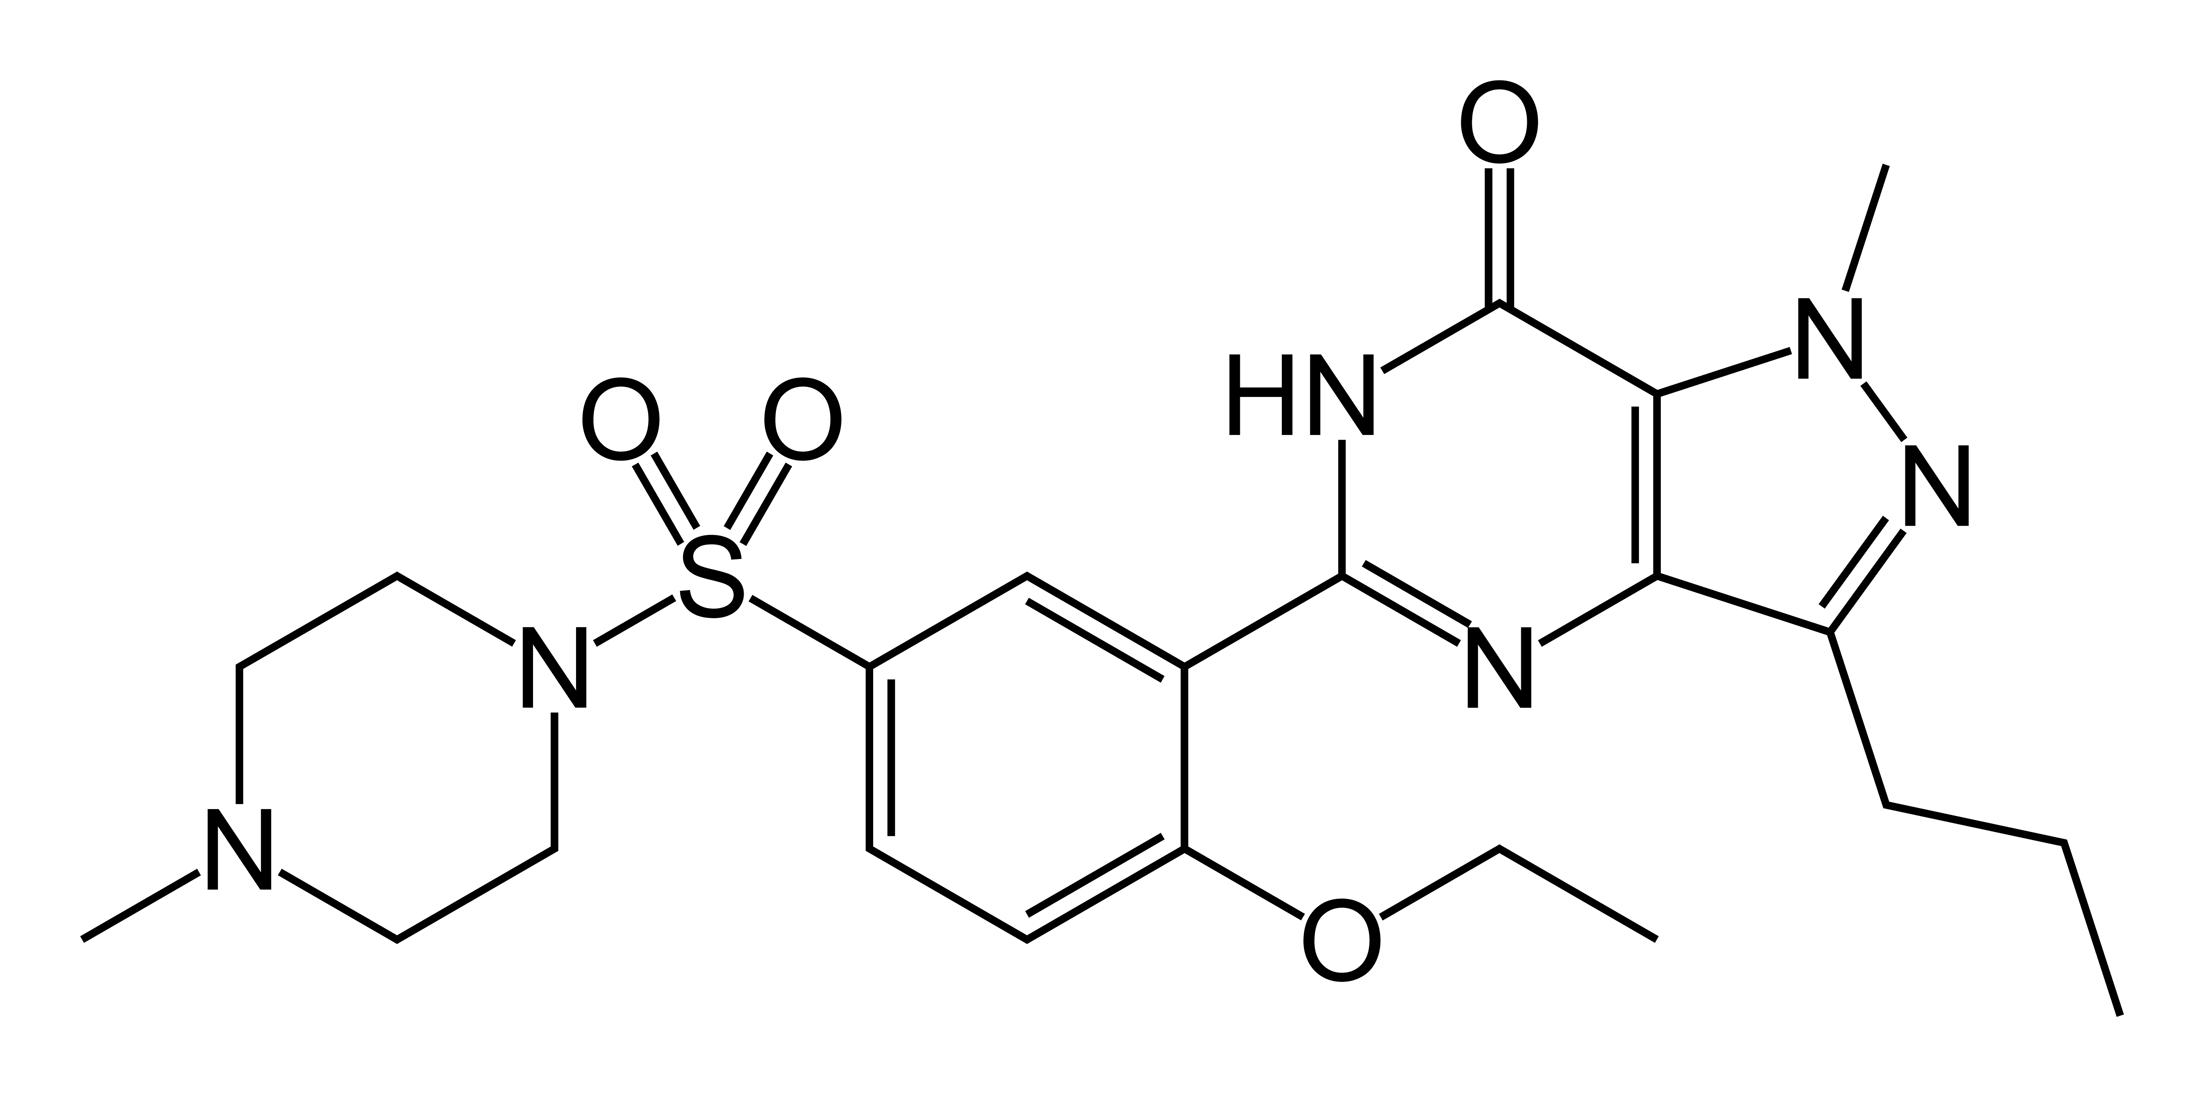 Chemical structure of Sildenafil